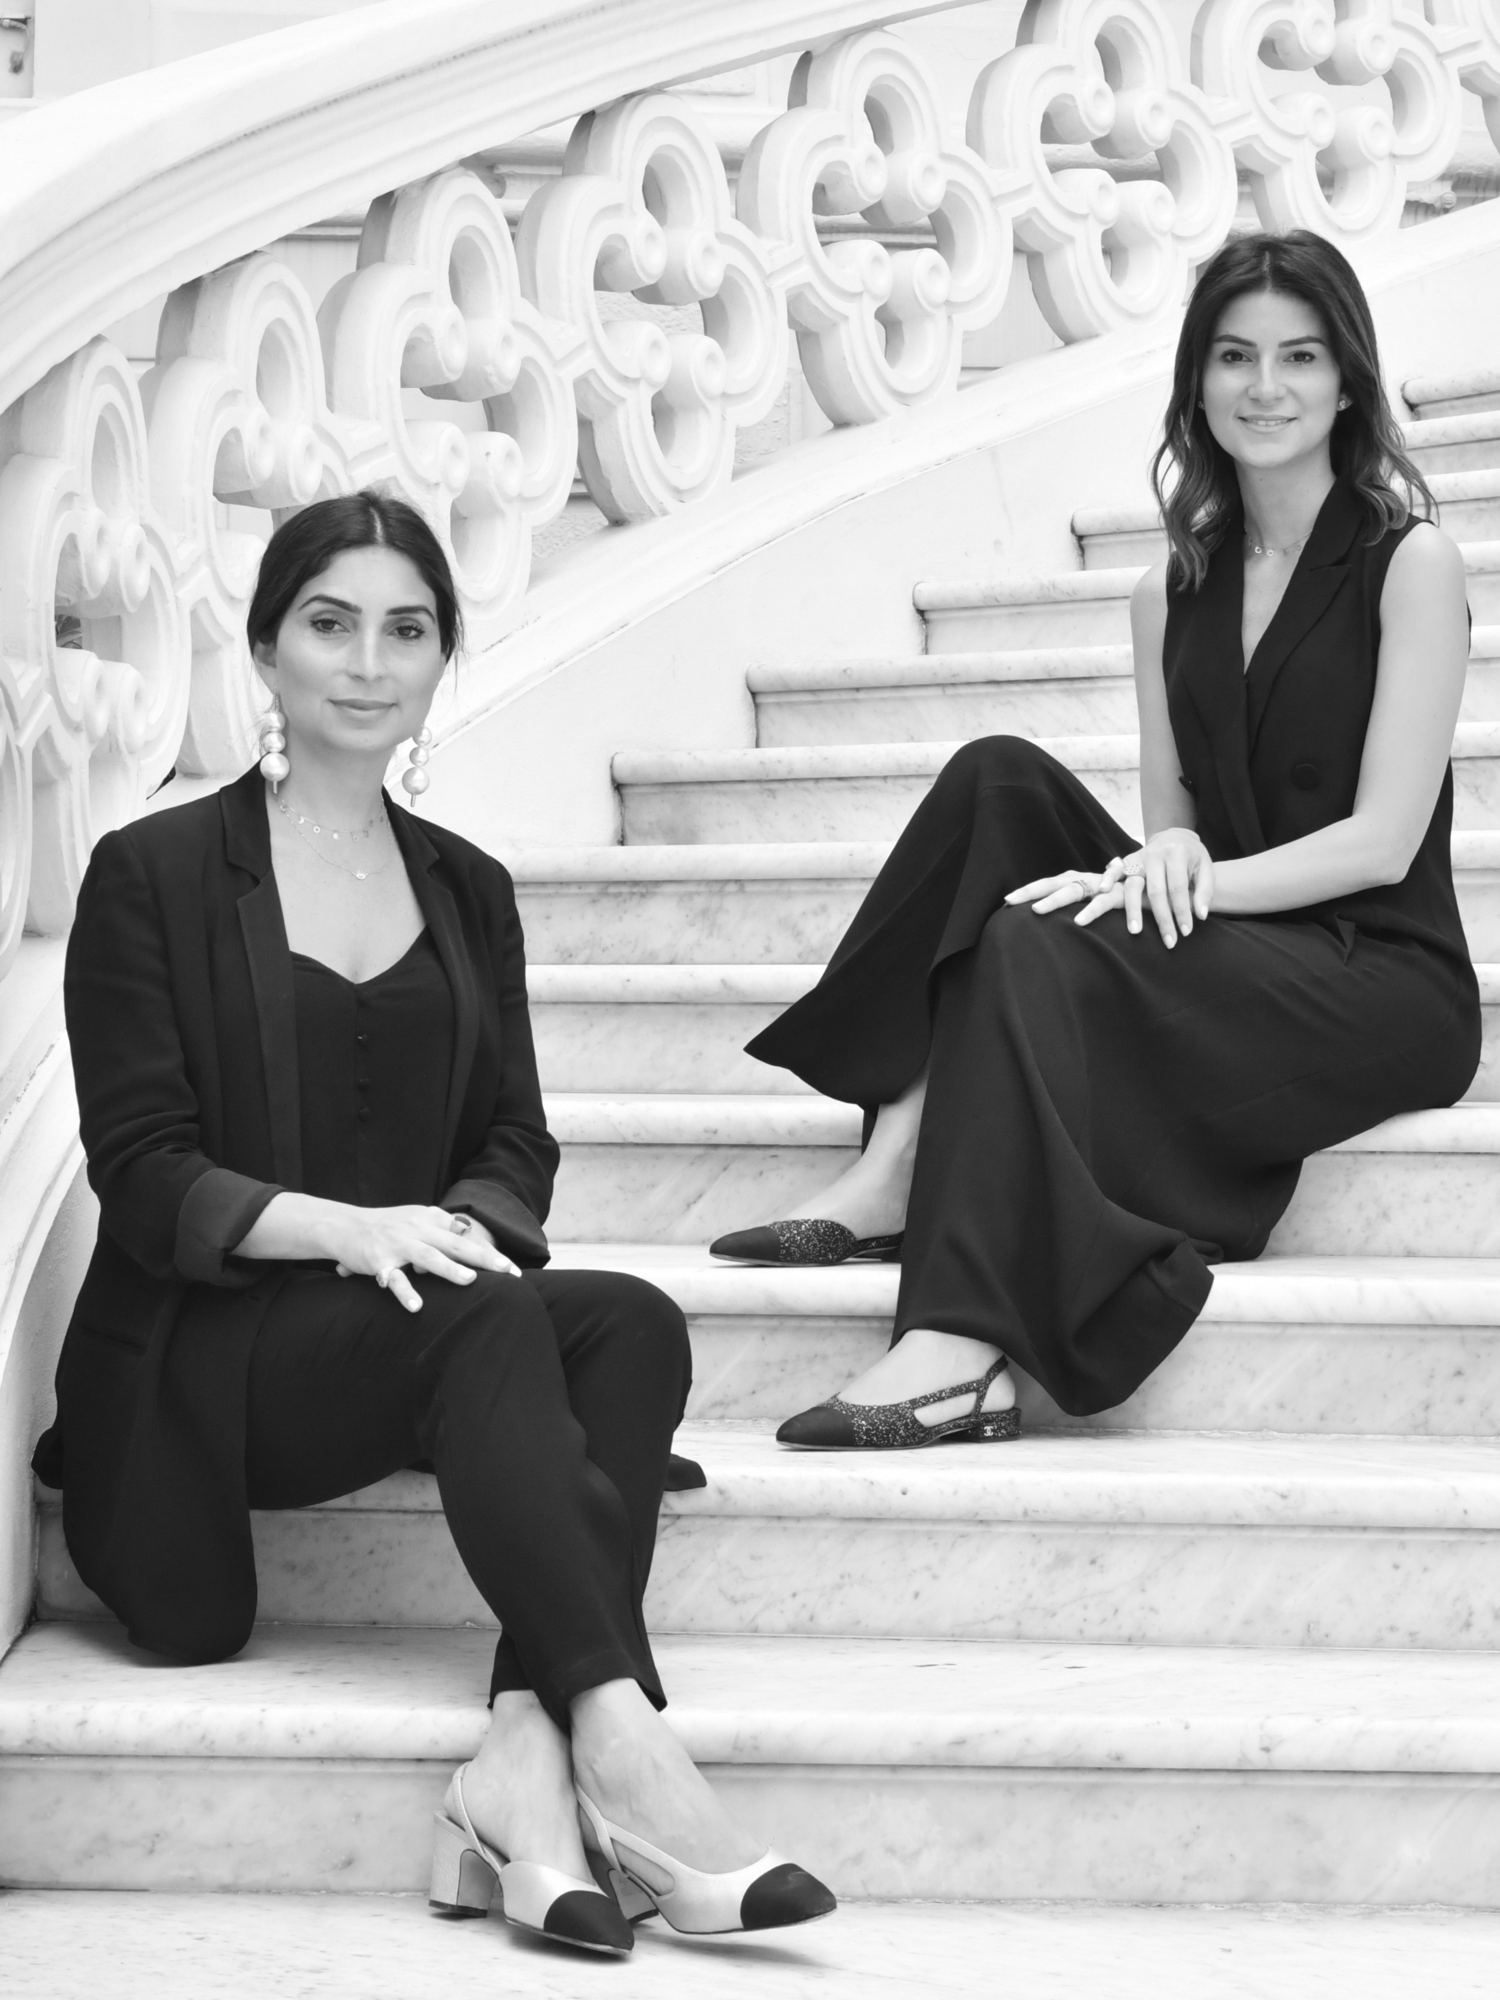 two sisters who are sitting on the stairs Nour and Maysa Saccal represent Saccal Design. The company provides interior design and architecture services as well as product design.